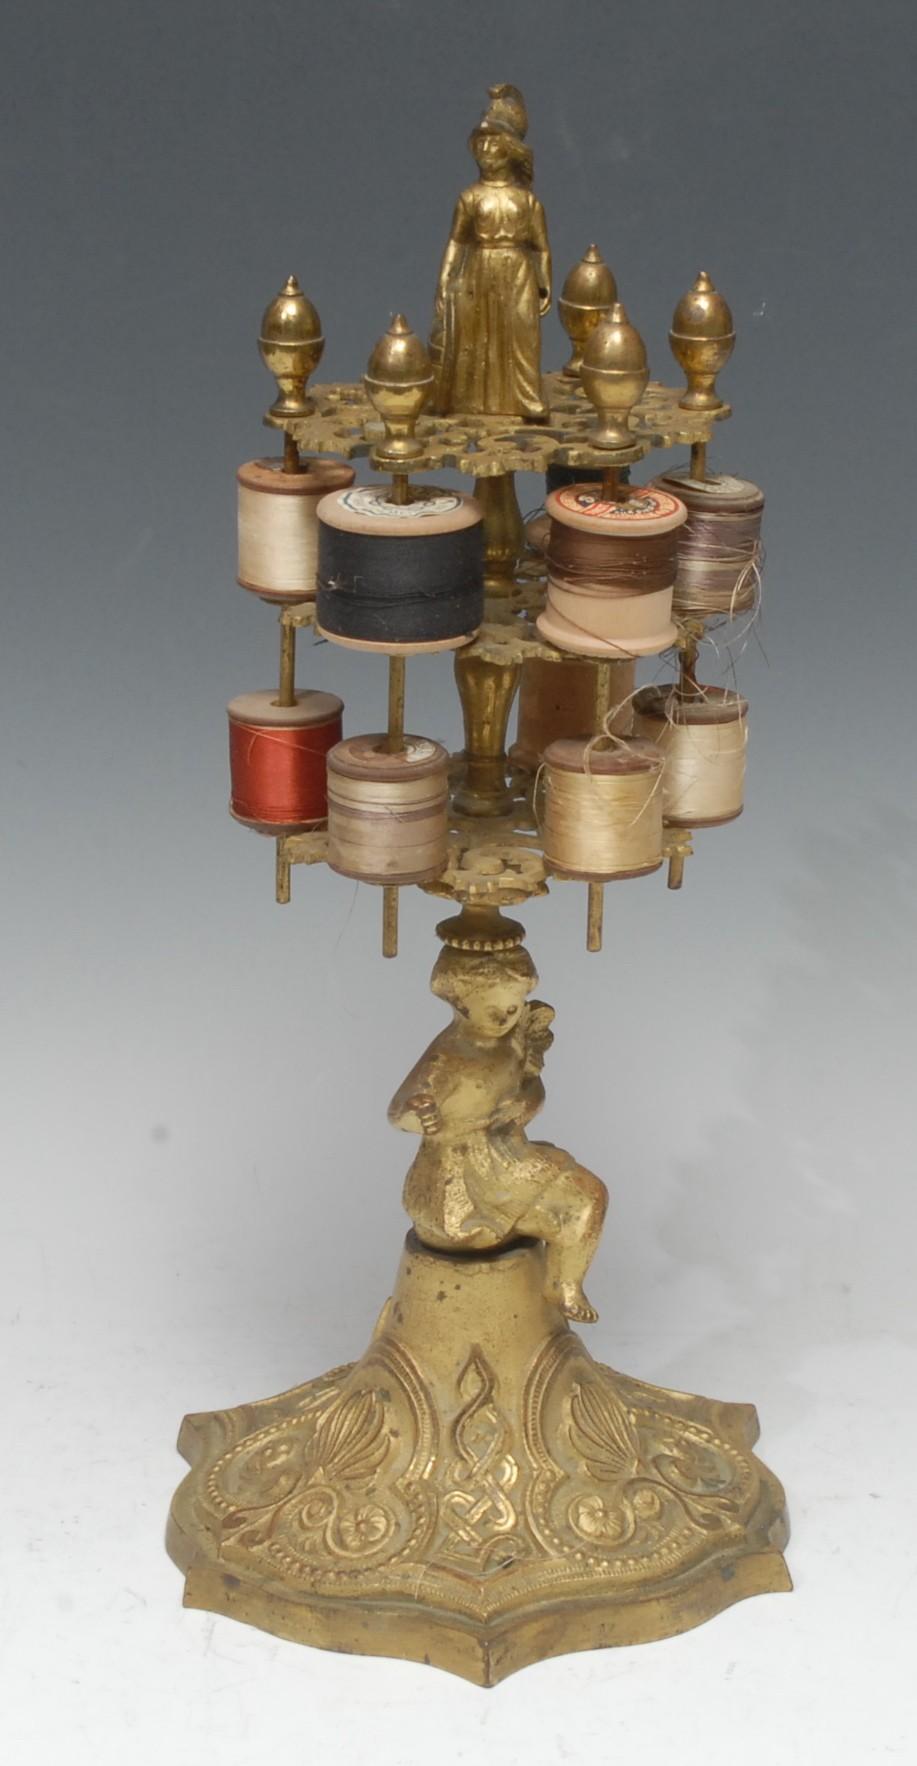 Sewing - a substantial 19th century gilt metal seamstress's cotton reel stand, crested by the figure